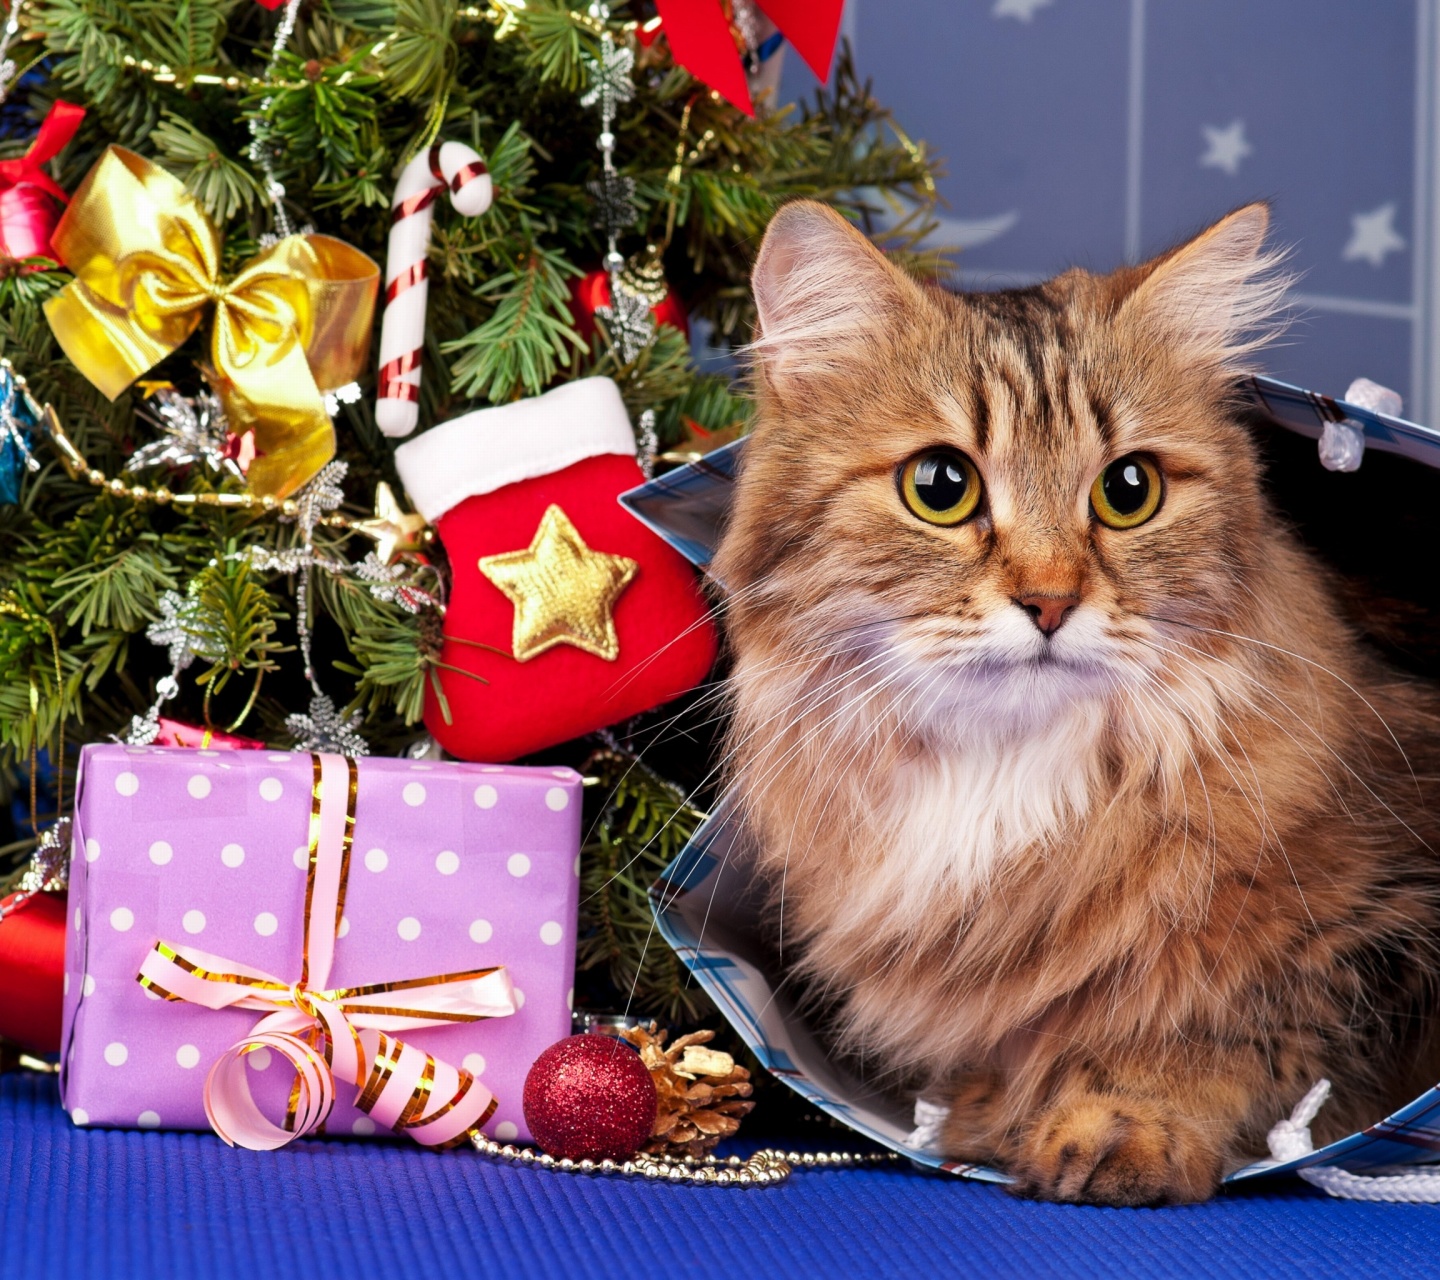 Merry Christmas Cards Wishes with Cat wallpaper 1440x1280